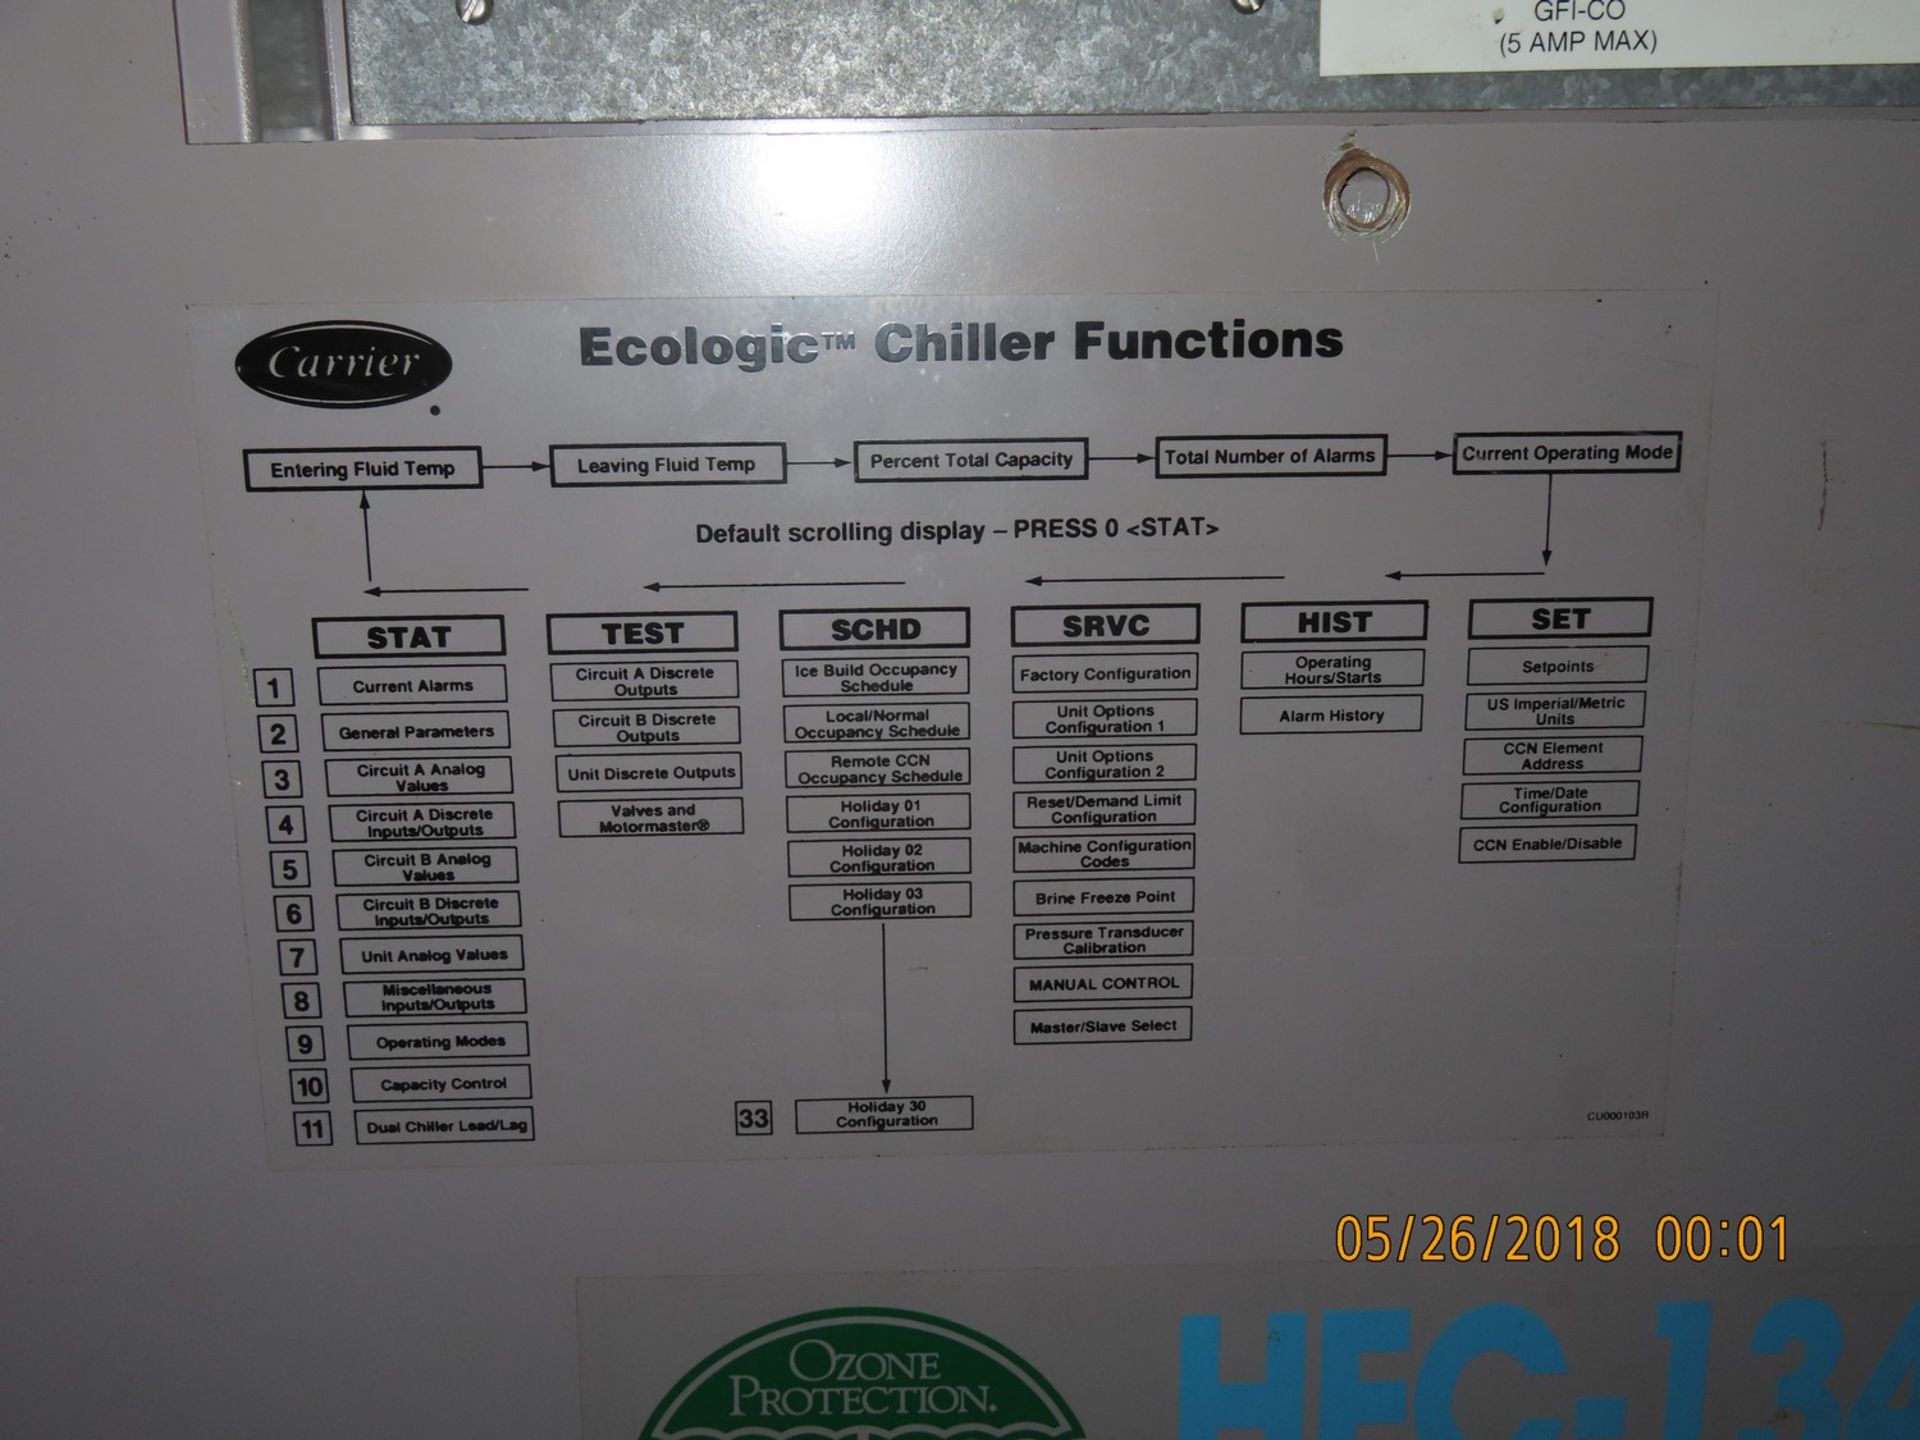 Water Chiller System Including (2) Carrier 30HXC116RY-630 Ecologic Chillers s/n 4499F60829 & - Image 5 of 9